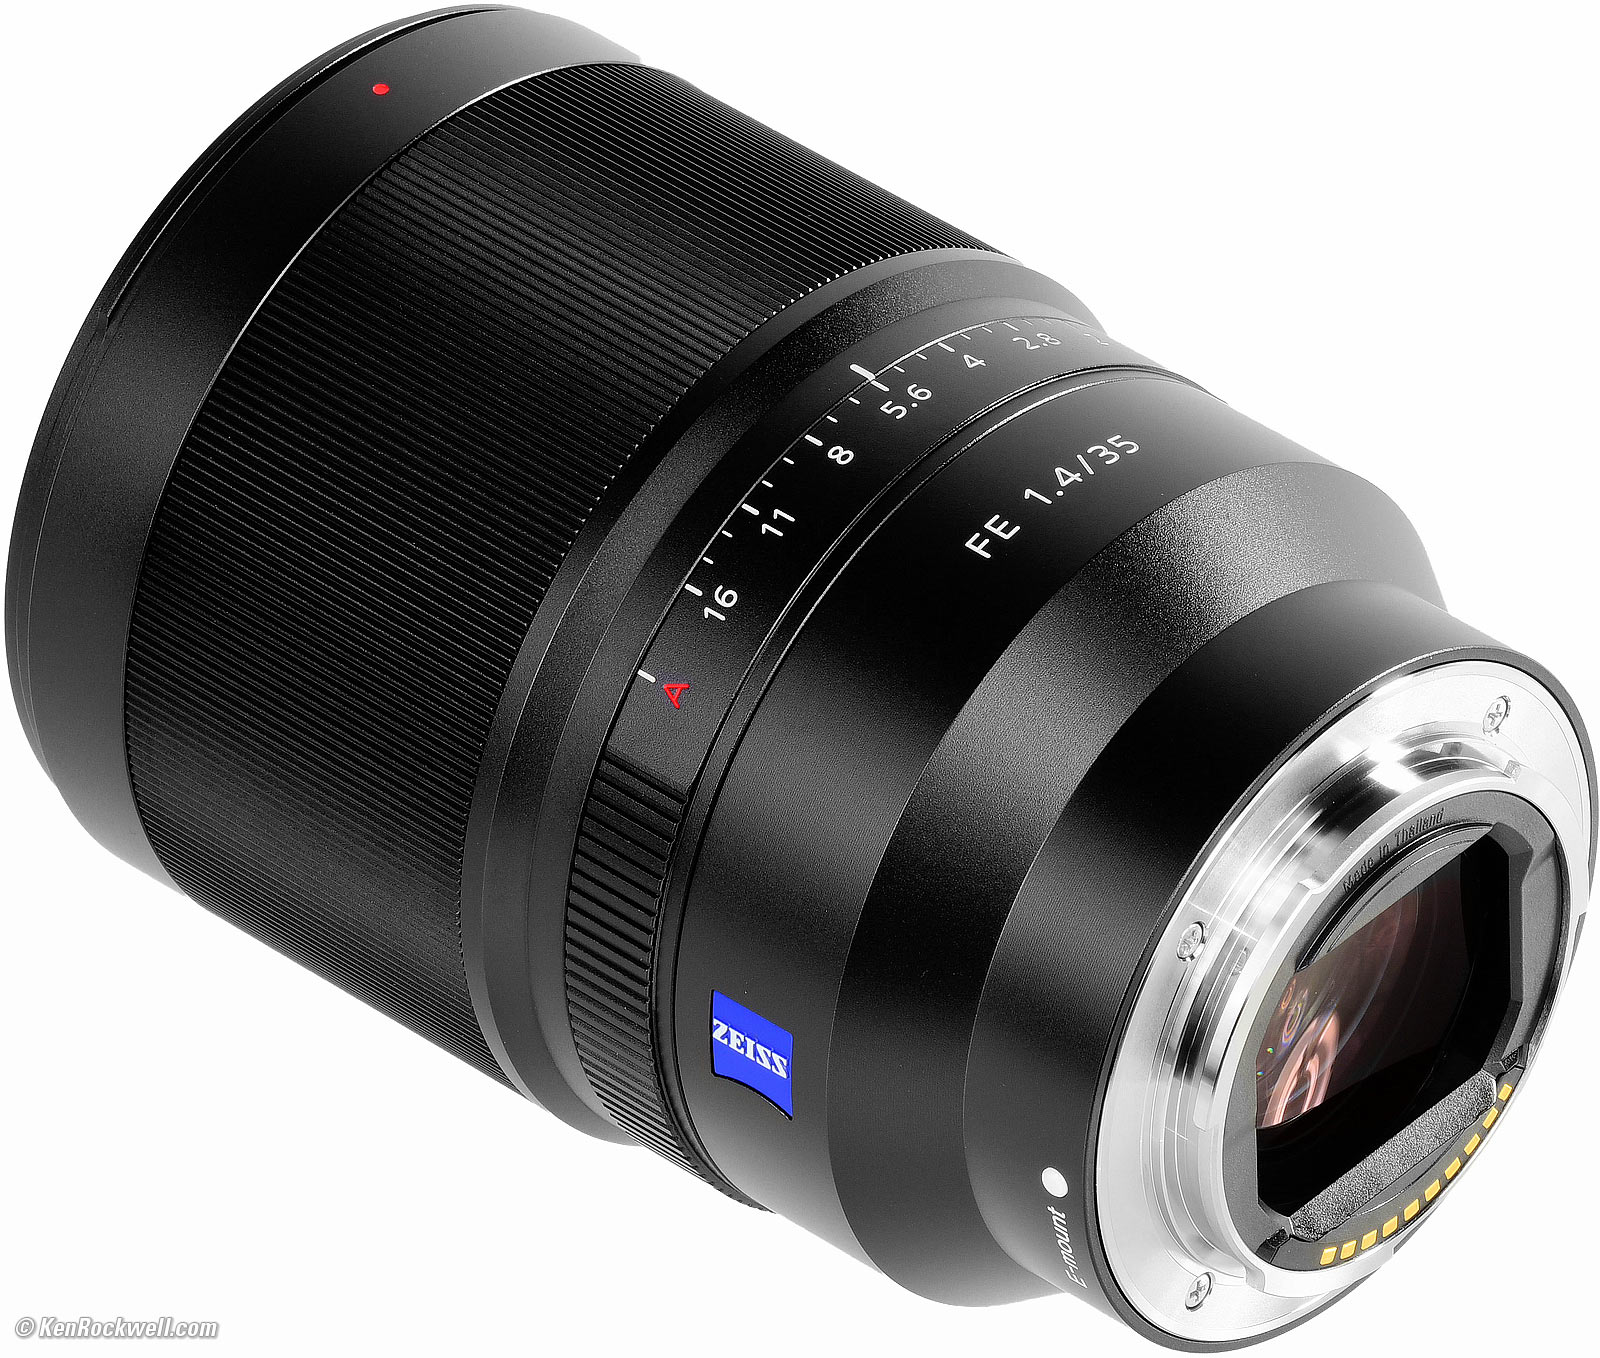 sony 35mm 1.8 review